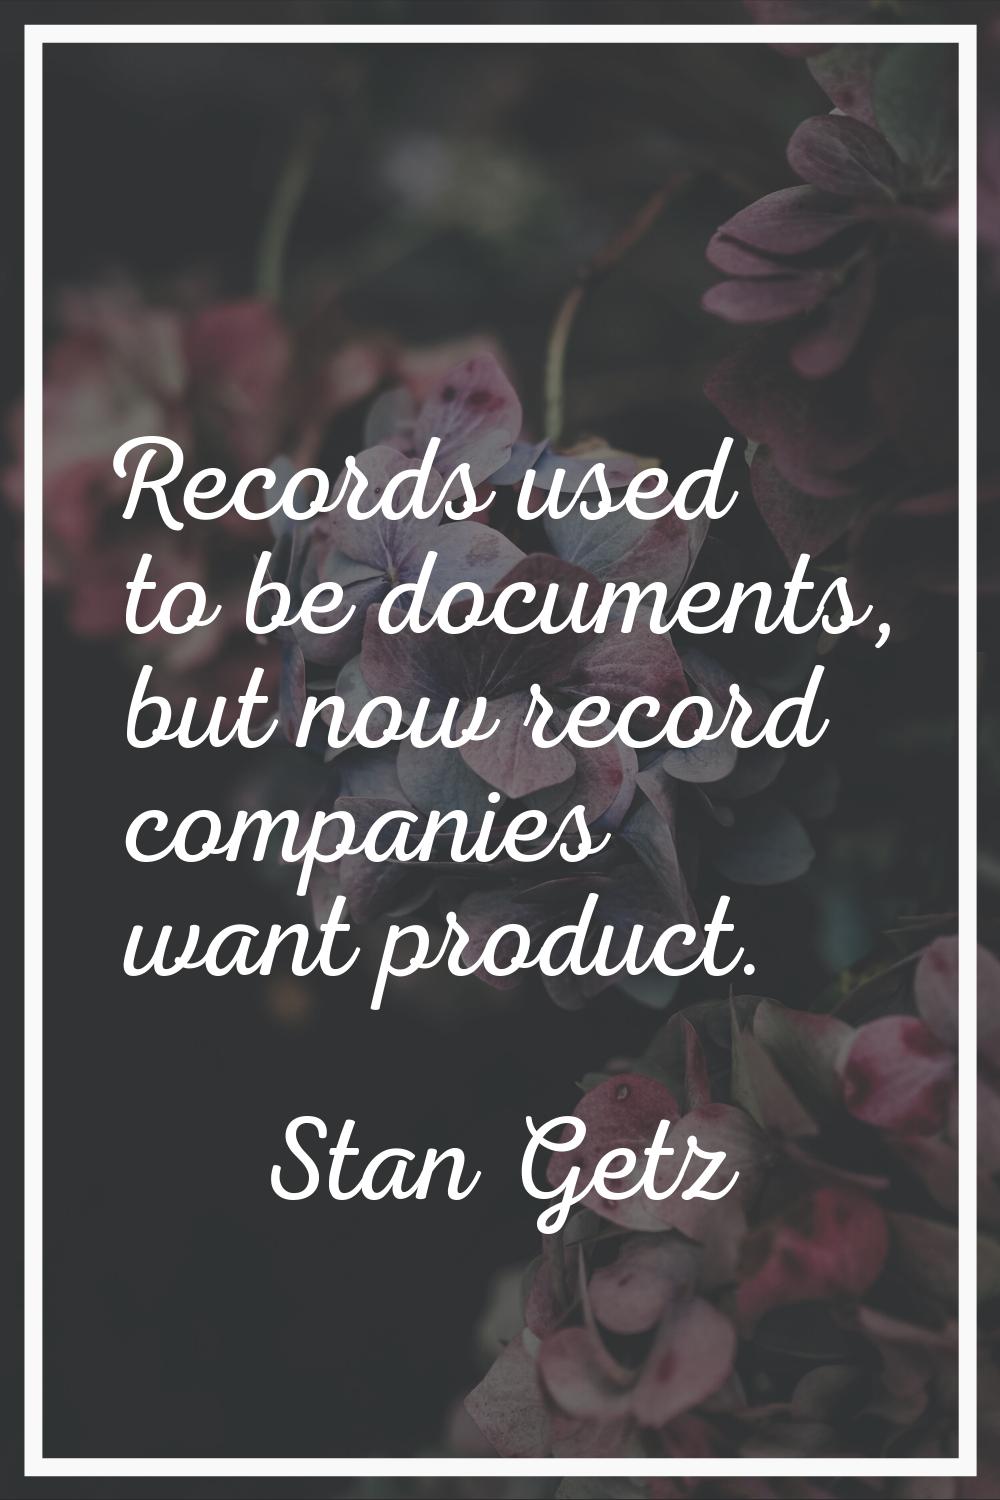 Records used to be documents, but now record companies want product.